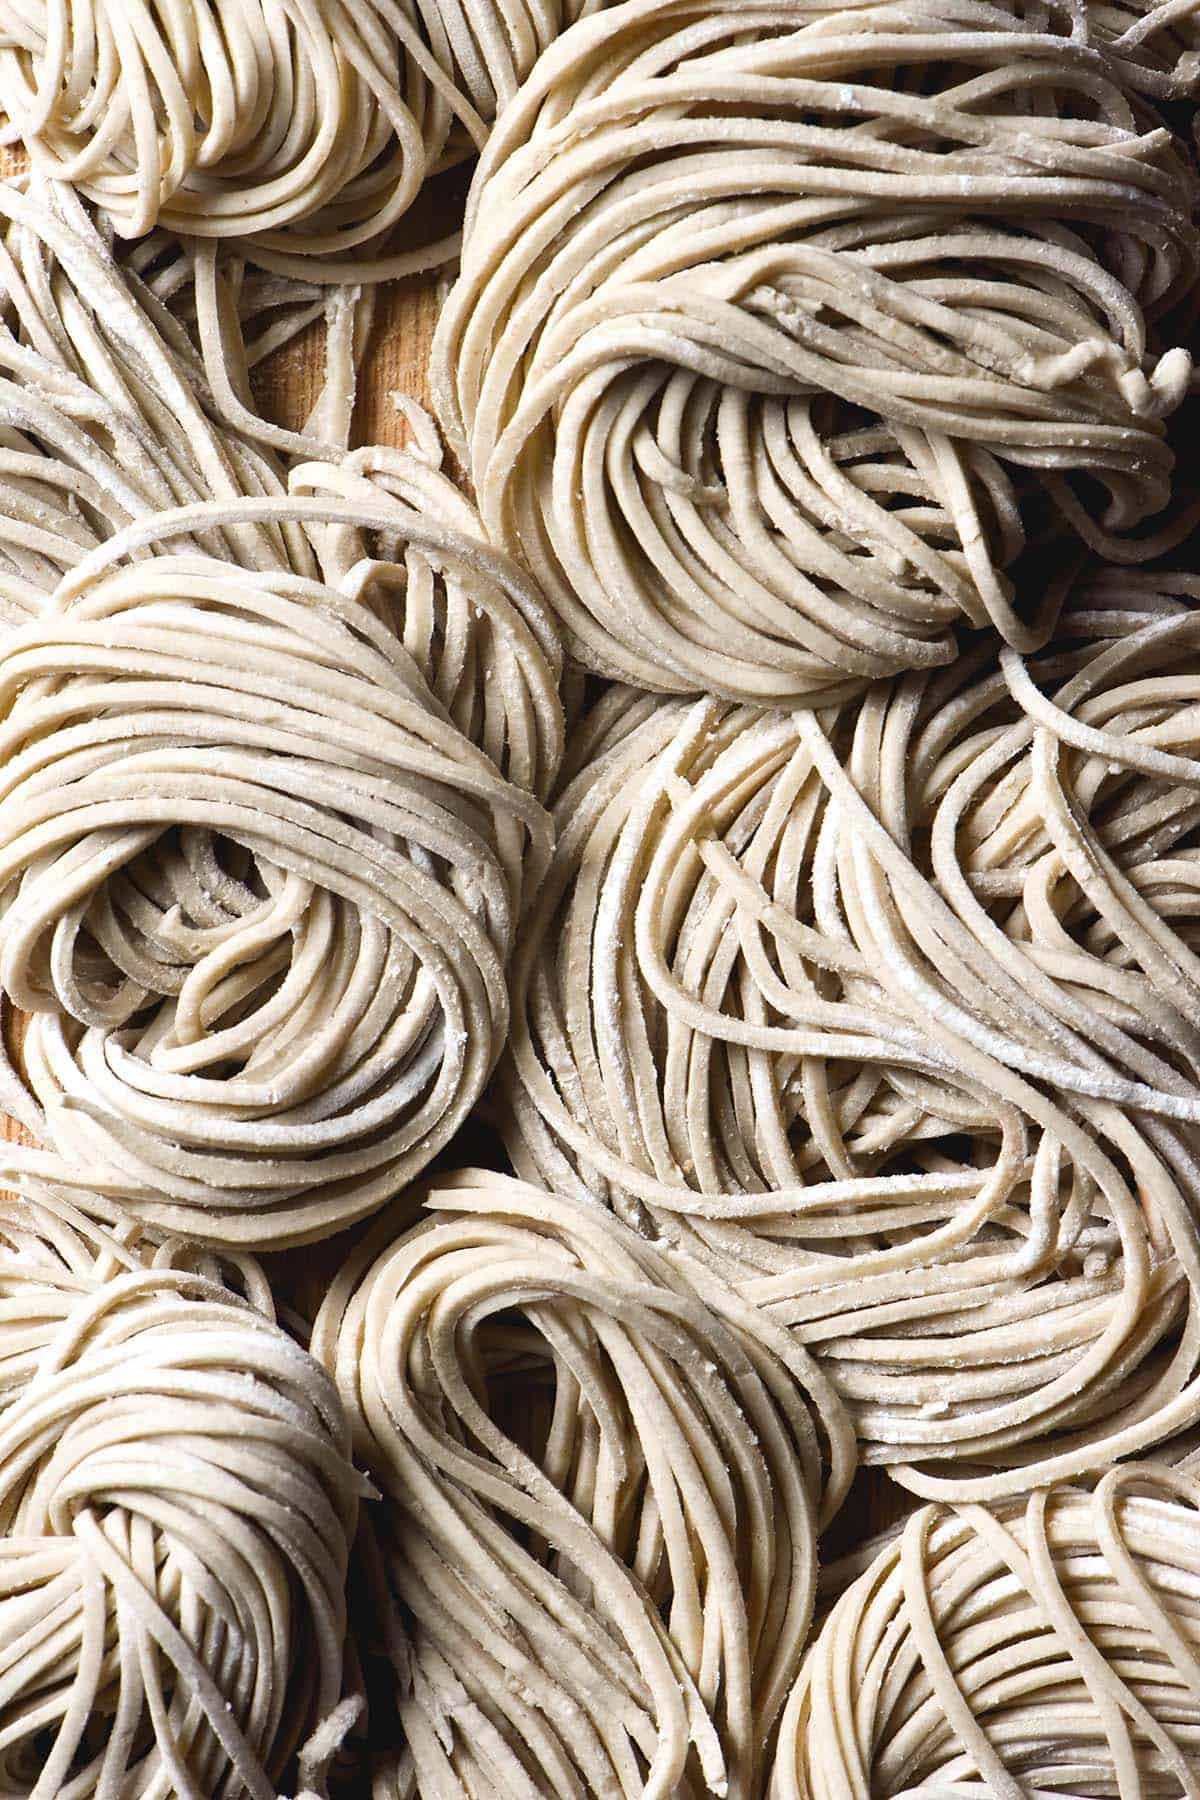 An aerial macro image of gluten free 100% buckwheat noodles arranged in nests on a wooden chopping board